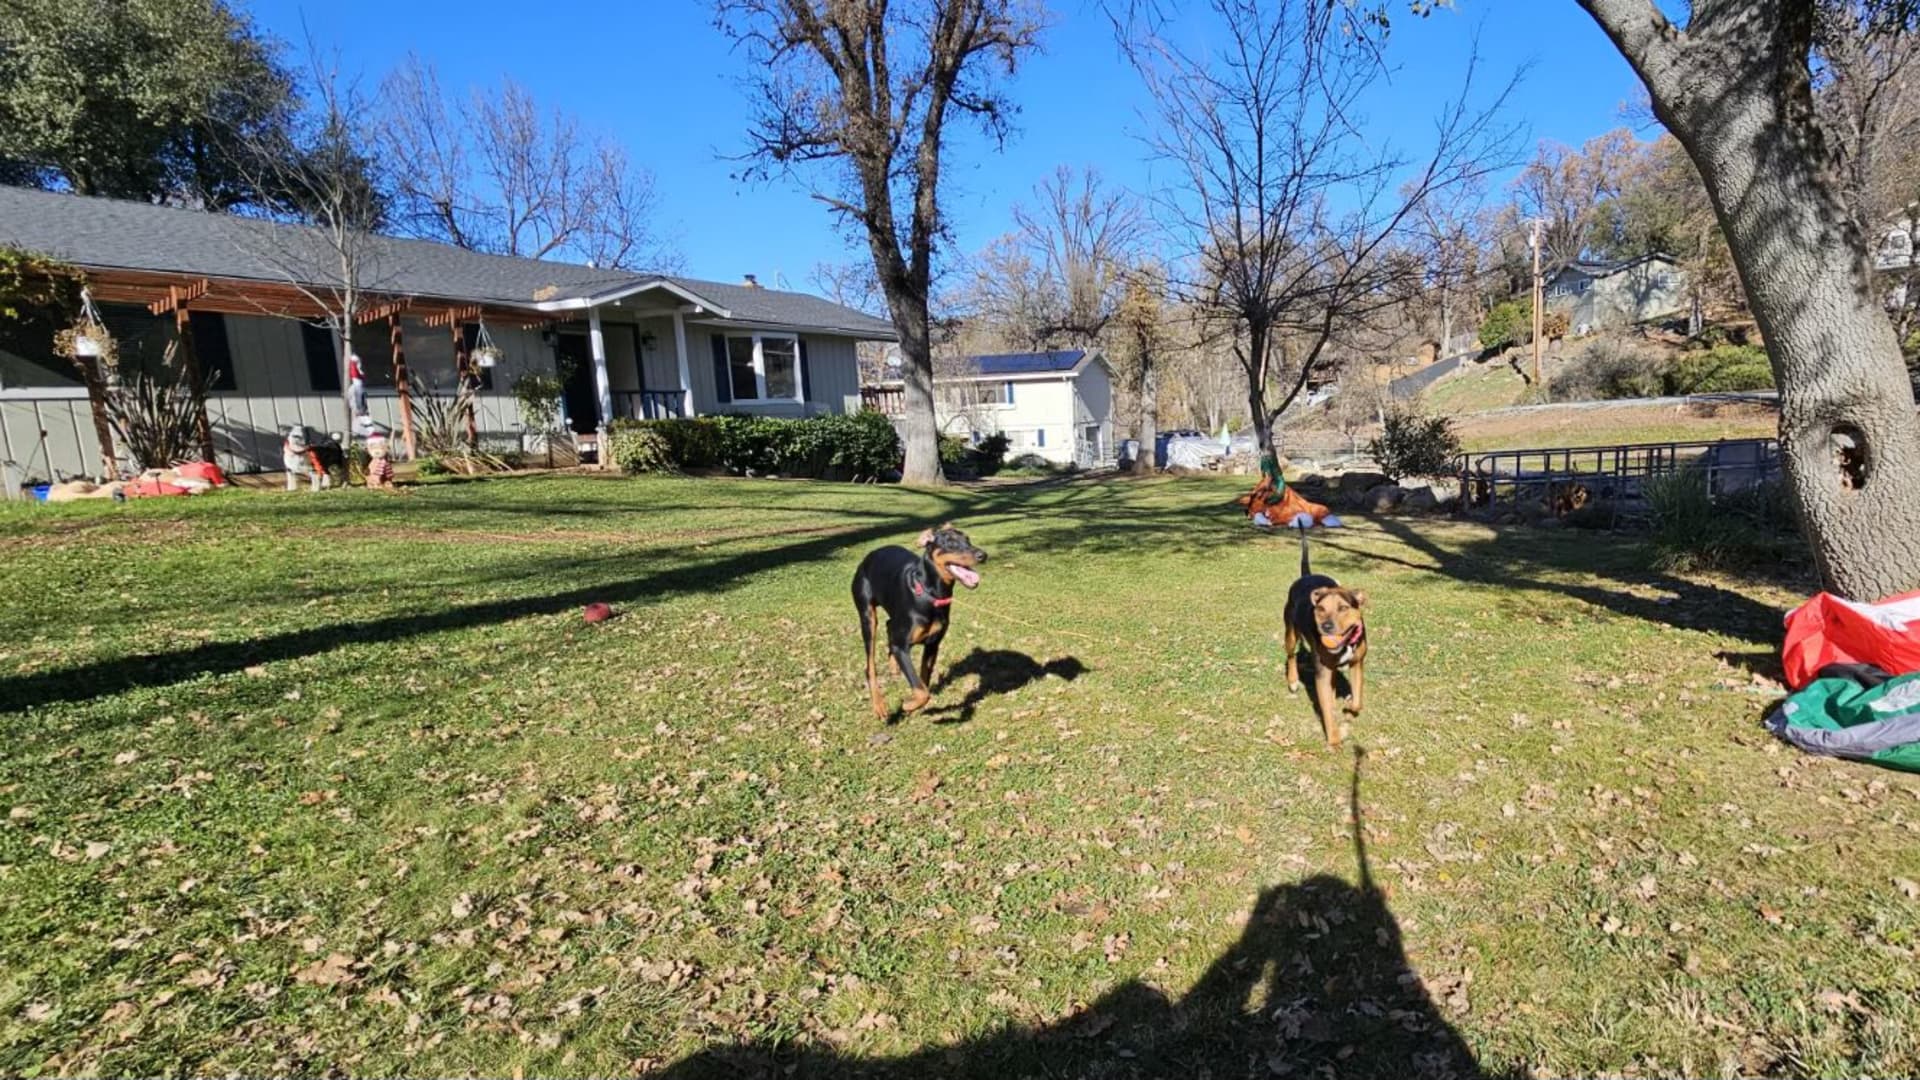 Dogs play at Darlene Tucker and Tom Pinter's home in Sonora, California.